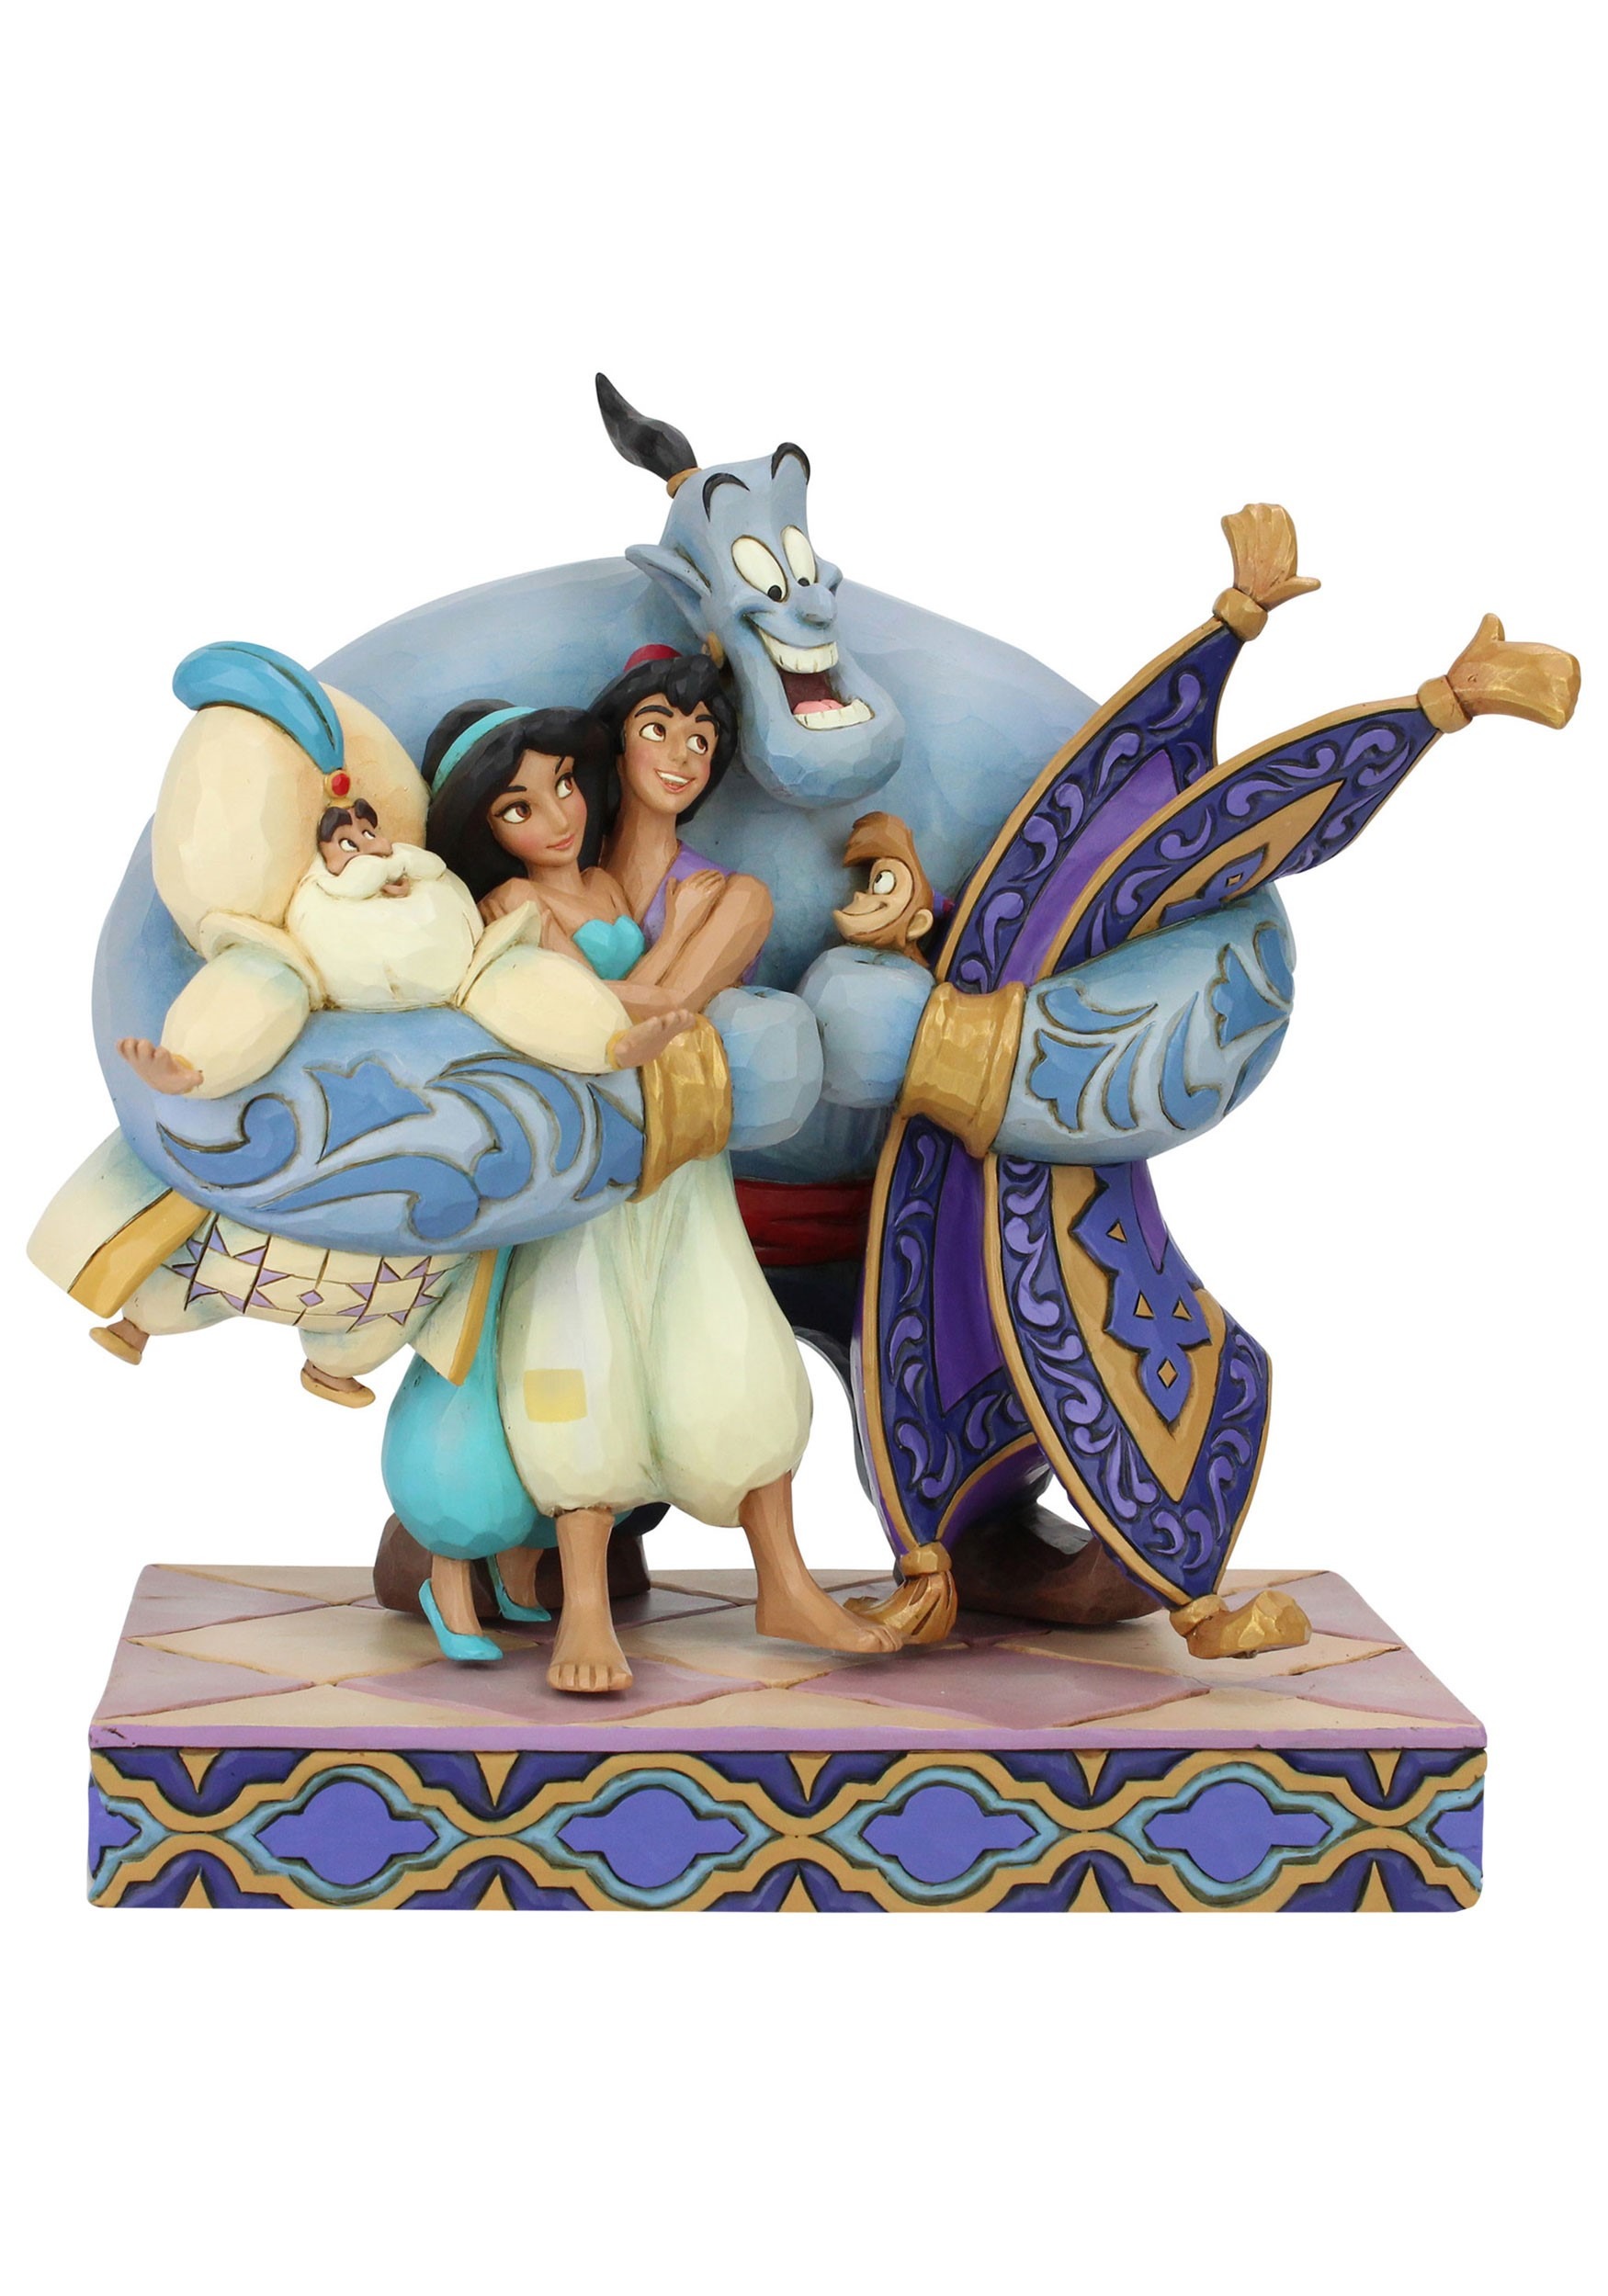 Aladdin Group Hug Statue by Jim Shore | Disney Collectibles